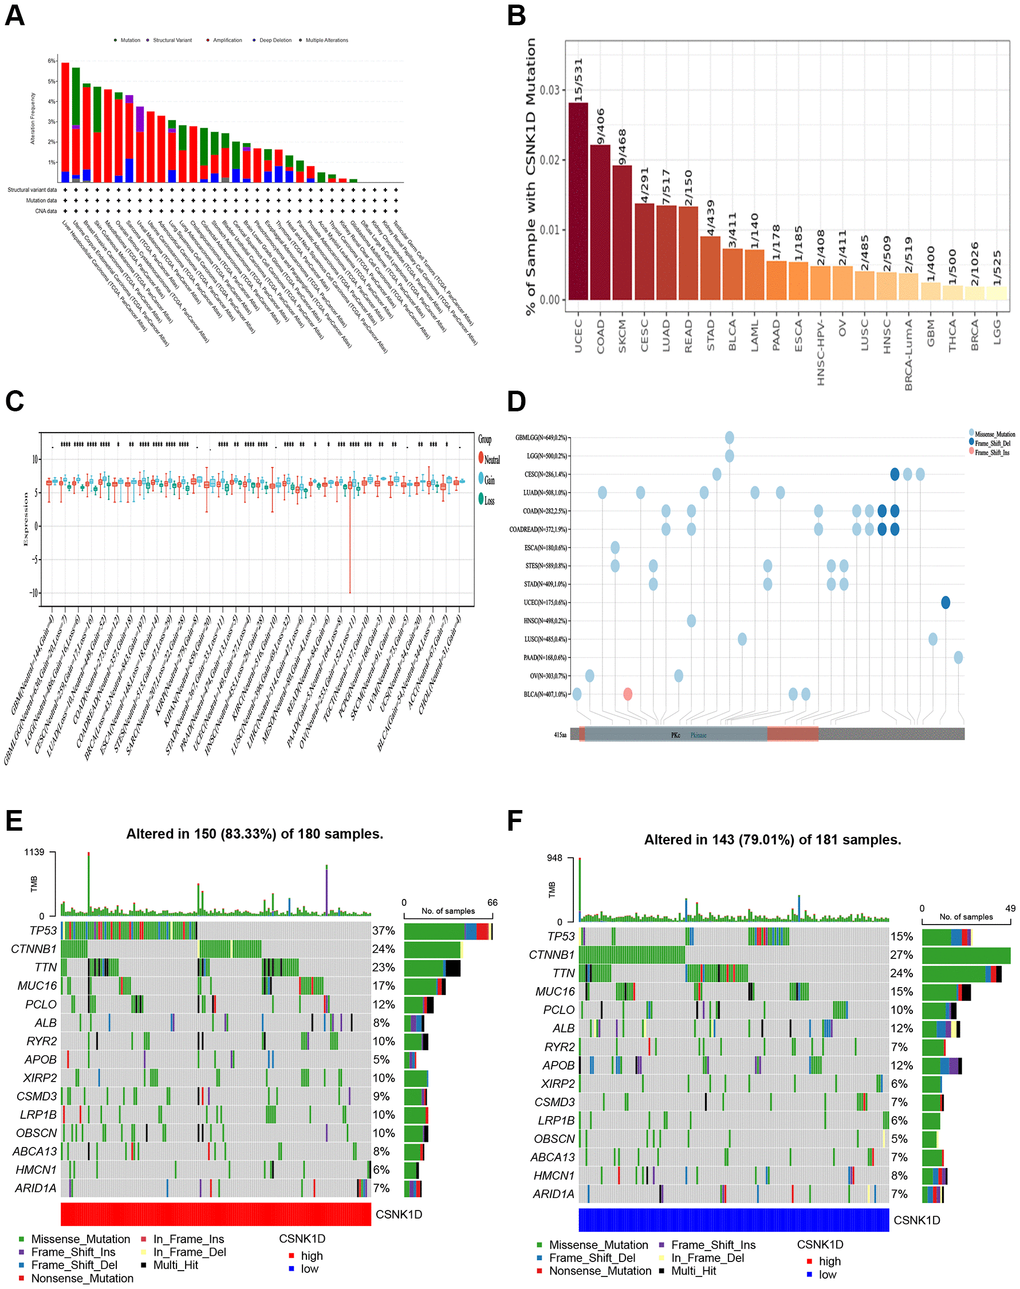 Distinct genetic alteration profiles of CSNK1D in pan-cancer based on the TCGA database. (A) Genetic alteration landscape (Mutation, Structural Variant, Amplification, and Deep Deletion) of CSNK1D in pan-cancer based on the TCGA database through the cBioPortal tool. (B) Mutation rate of CSNK1D among tumors by the TIMER tool. (C) CNVs of CSNK1D in various tumors by SangerBox portal. (D) SNVs of CSNK1D among different types of the tumor via SangerBox tool. (E) Tumor somatic mutation waterfall graph in CSNK1D high group based on TCGA-LIHC database. (F) Tumor somatic mutation waterfall graph in CSNK1D low group based on TCGA-LIHC database.